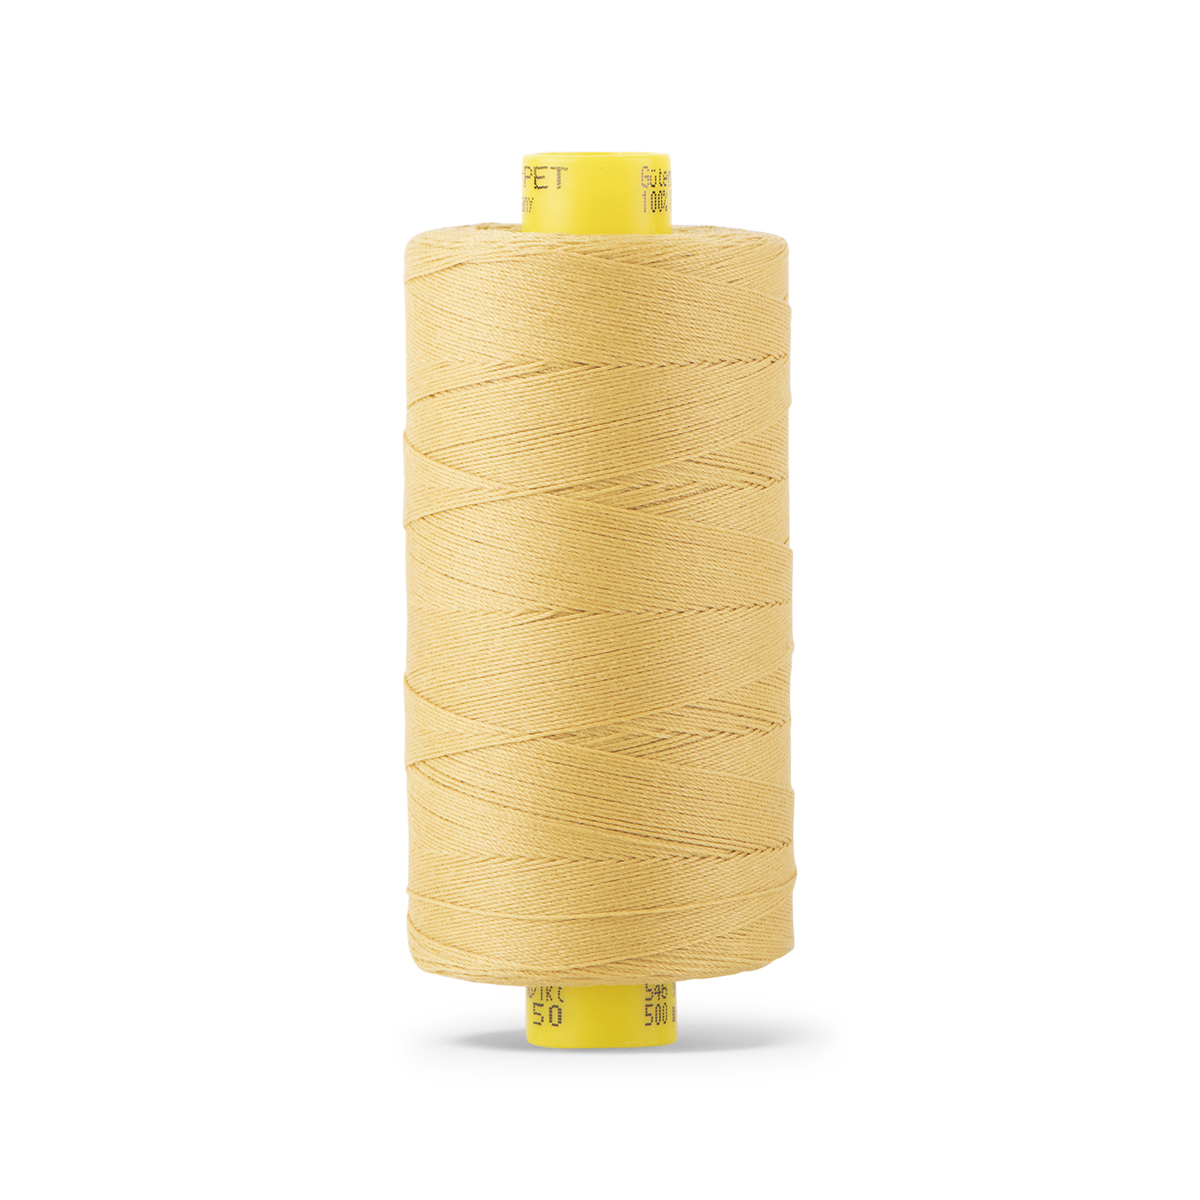 Gütermann All Purpose rPET Recycled Thread - Turquoise 192